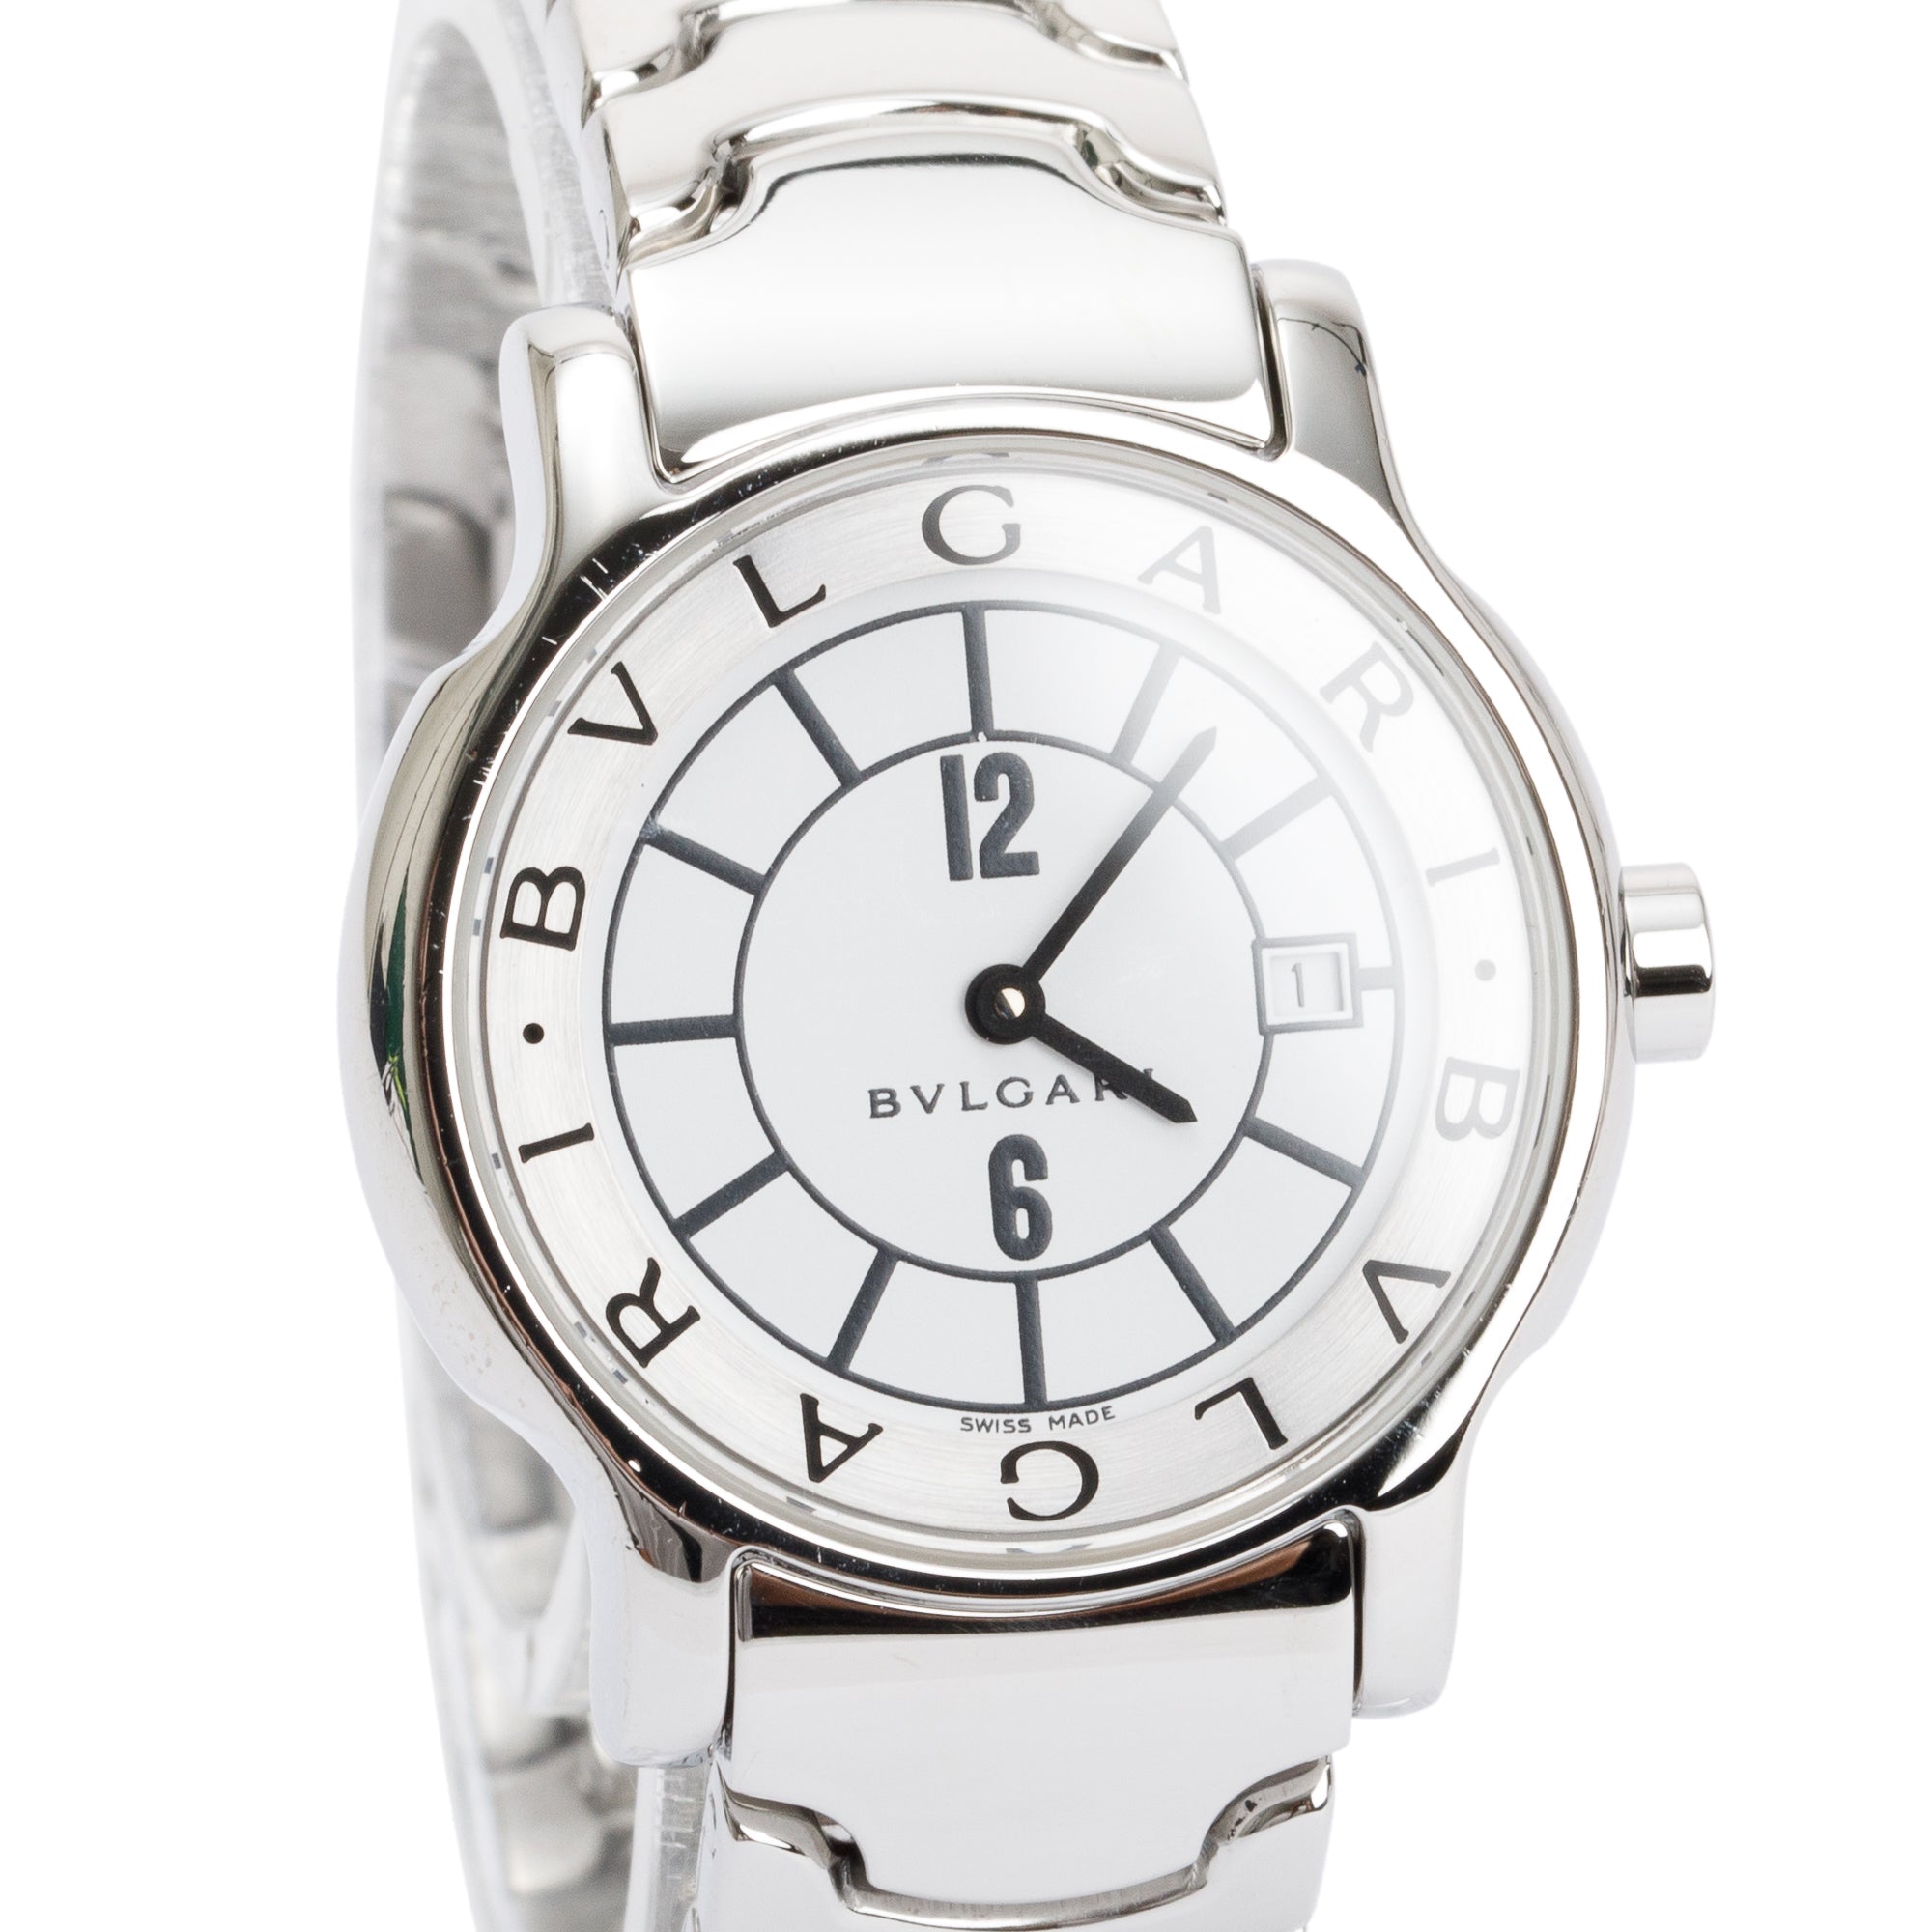 BVLGARI Stainless Steel Solotempo 29 MM Watch w/ Box